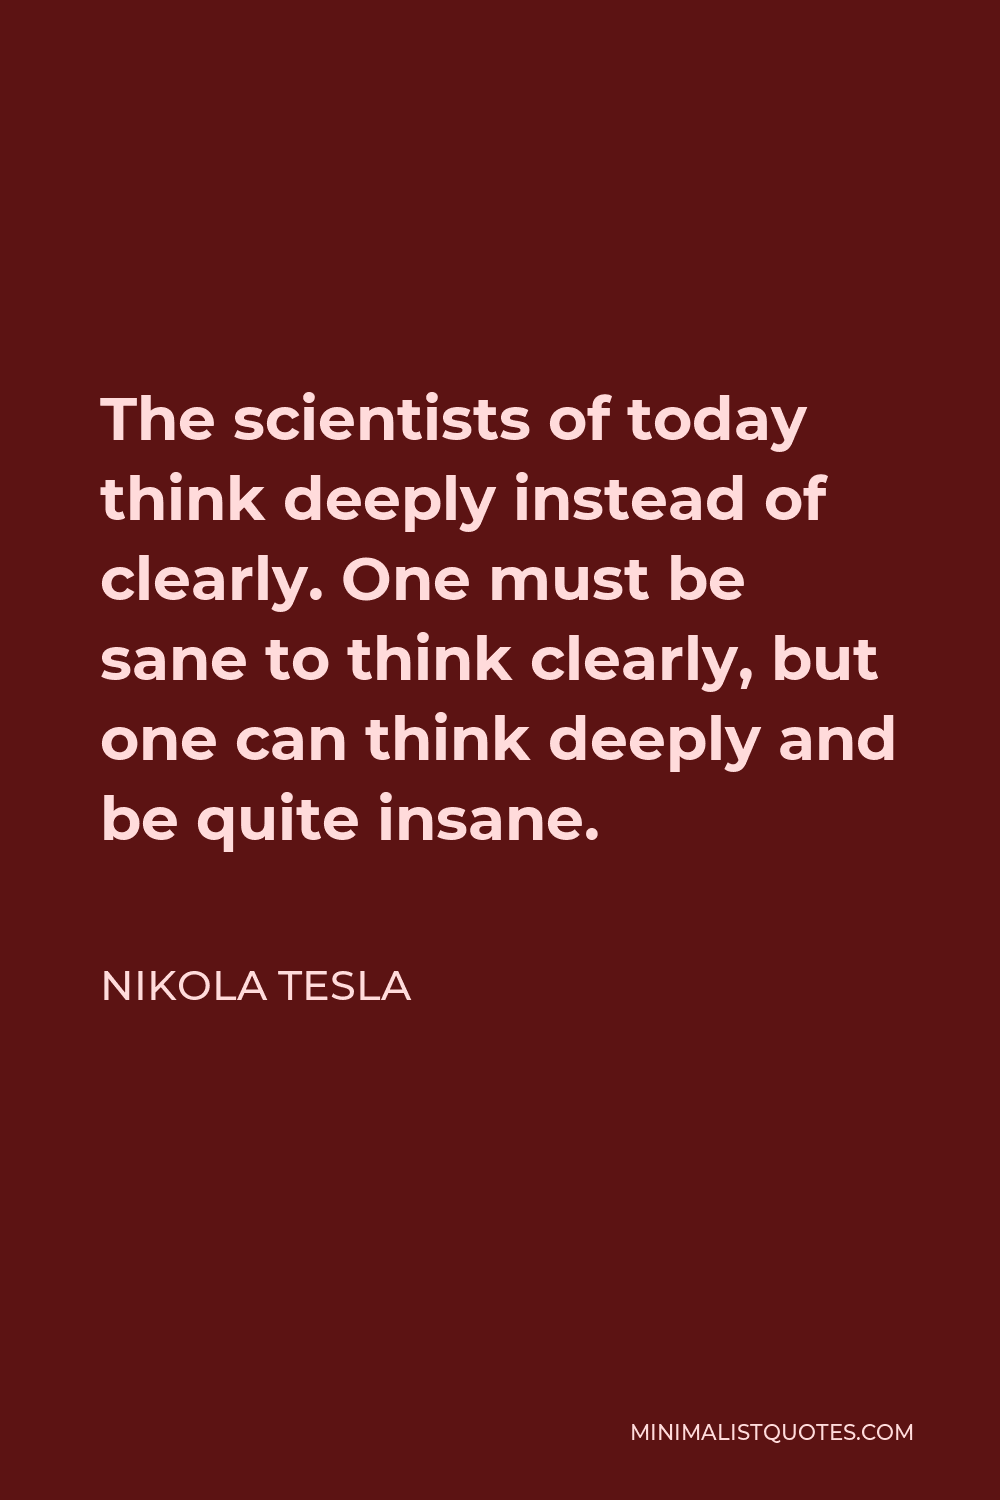 Nikola Tesla Quote - The scientists of today think deeply instead of clearly. One must be sane to think clearly, but one can think deeply and be quite insane.